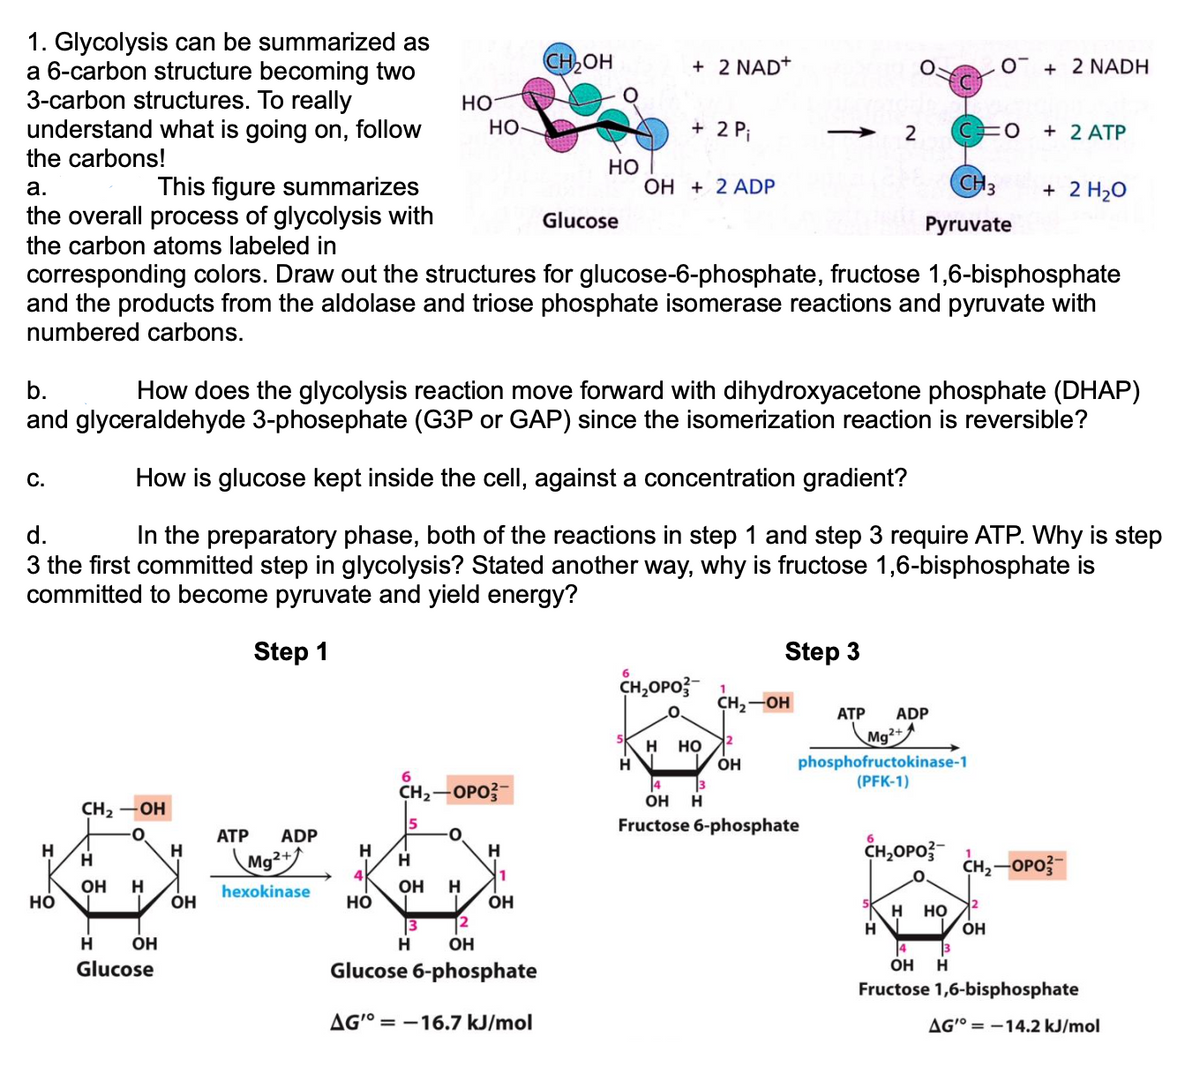 1. Glycolysis can be summarized as
a 6-carbon structure becoming two
3-carbon structures. To really
understand what is going on, follow
the carbons!
C.
H
CH₂2-OH
HO
H
0
ATP ADP
H
H
Mg²+
426
4
hexokinase
OH
HO
OH H
H OH
6
Glucose
a.
This figure summarizes
the overall process of glycolysis with
the carbon atoms labeled in
corresponding colors. Draw out the structures for glucose-6-phosphate, fructose 1,6-bisphosphate
and the products from the aldolase and triose phosphate isomerase reactions and pyruvate with
numbered carbons.
HO
CH₂-OPO
5
H
b. How does the glycolysis reaction move forward with dihydroxyacetone phosphate (DHAP)
and glyceraldehyde 3-phosephate (G3P or GAP) since the isomerization reaction is reversible?
How is glucose kept inside the cell, against a concentration gradient?
d.
In the preparatory phase, both of the reactions in step 1 and step 3 require ATP. Why is step
3 the first committed step in glycolysis? Stated another way, why is fructose 1,6-bisphosphate is
committed to become pyruvate and yield energy?
Step 1
OH H
HO-
3 12
H OH
H
1
OH
CH₂OH
Glucose 6-phosphate
HO
AG'° -16.7 kJ/mol
Glucose
6
+ 2 NAD+
CH₂OPO
H
+ 2 Pi
OH + 2 ADP
H
HO
CH₂-OH
OH
2
Step 3
ATP ADP
Mg2+A
phosphofructokinase-1
(PFK-1)
4
3
OH H
Fructose 6-phosphate
CH3
Pyruvate
H
CH₂OPO 1
0
O
H HO
+ 2 NADH
OH
+ 2 ATP
+ 2 H₂O
CH₂-OPO3-
4 3
OH H
Fructose 1,6-bisphosphate
AG'= -14.2 kJ/mol